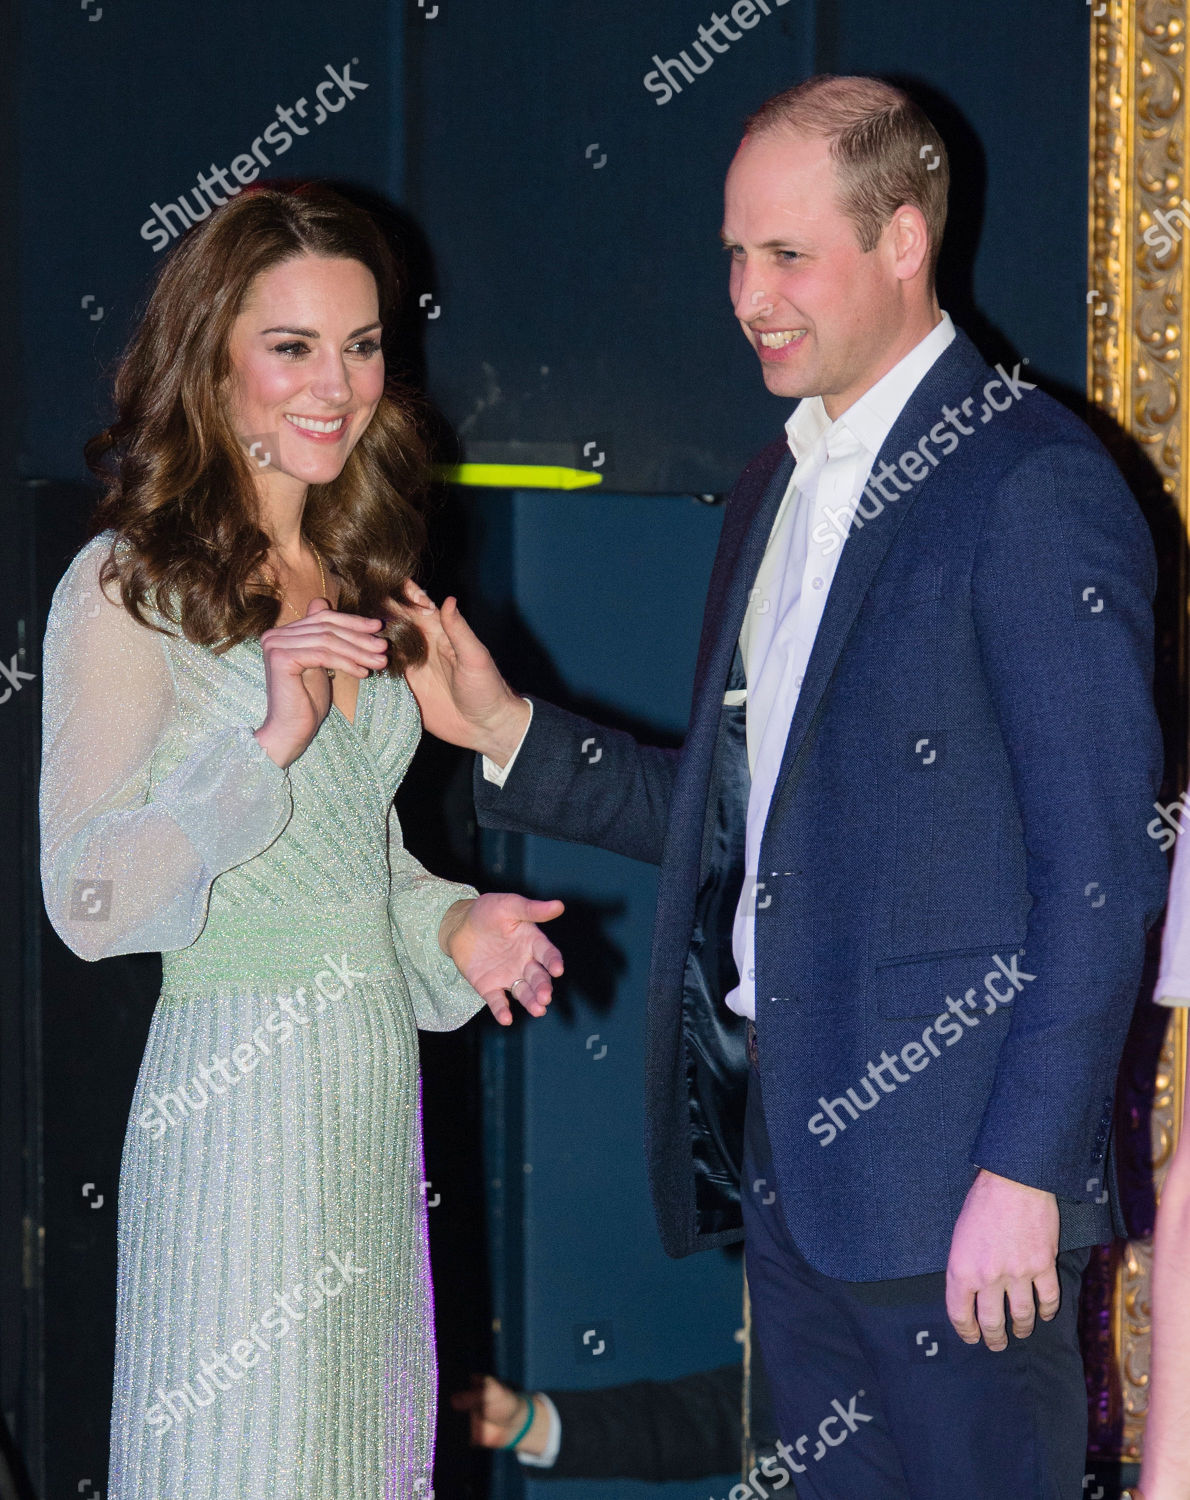 prince-william-and-catherine-duchess-of-cambridge-visit-to-northern-ireland-shutterstock-editorial-10122529w.jpg